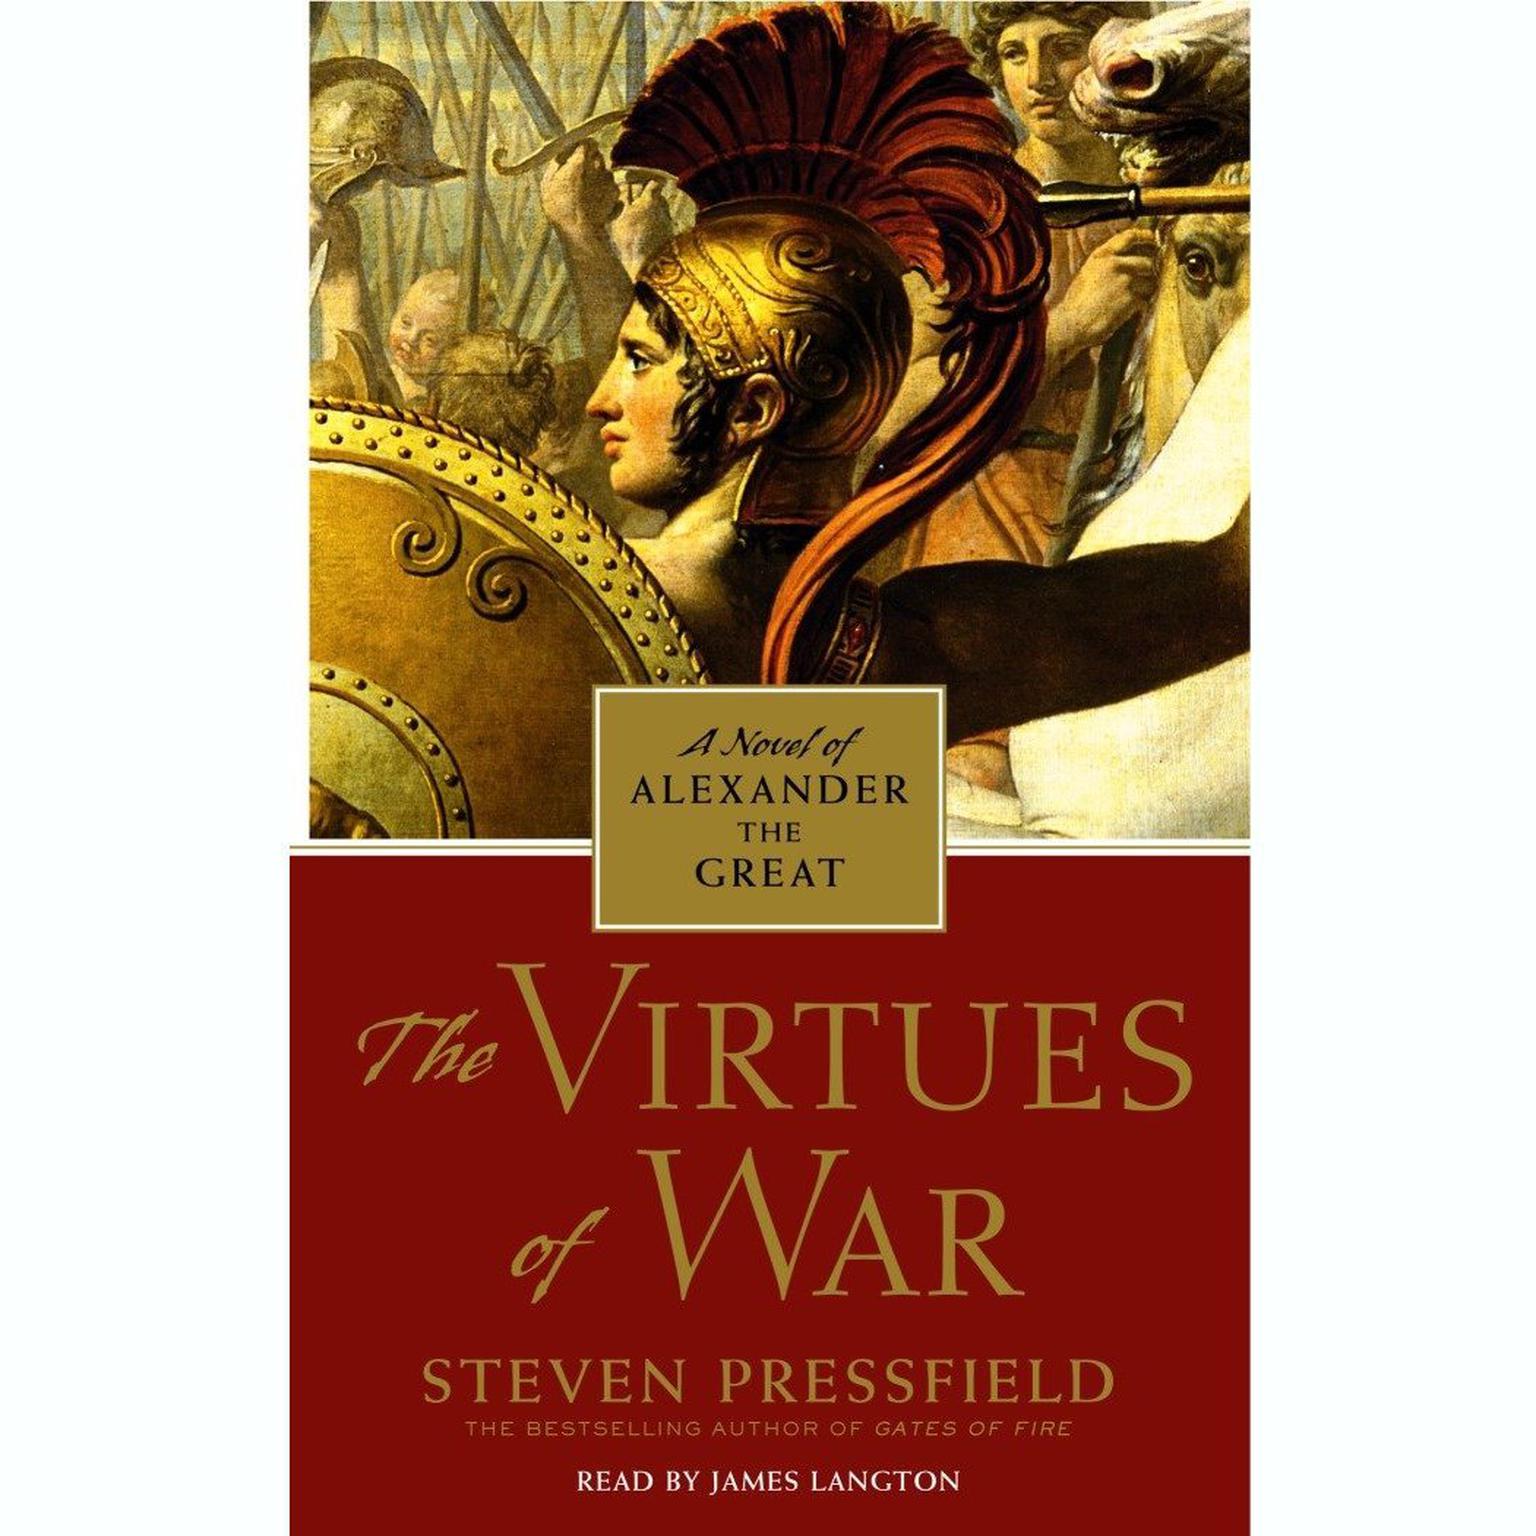 The Virtues of War (Abridged): A Novel of Alexander the Great Audiobook, by Steven Pressfield